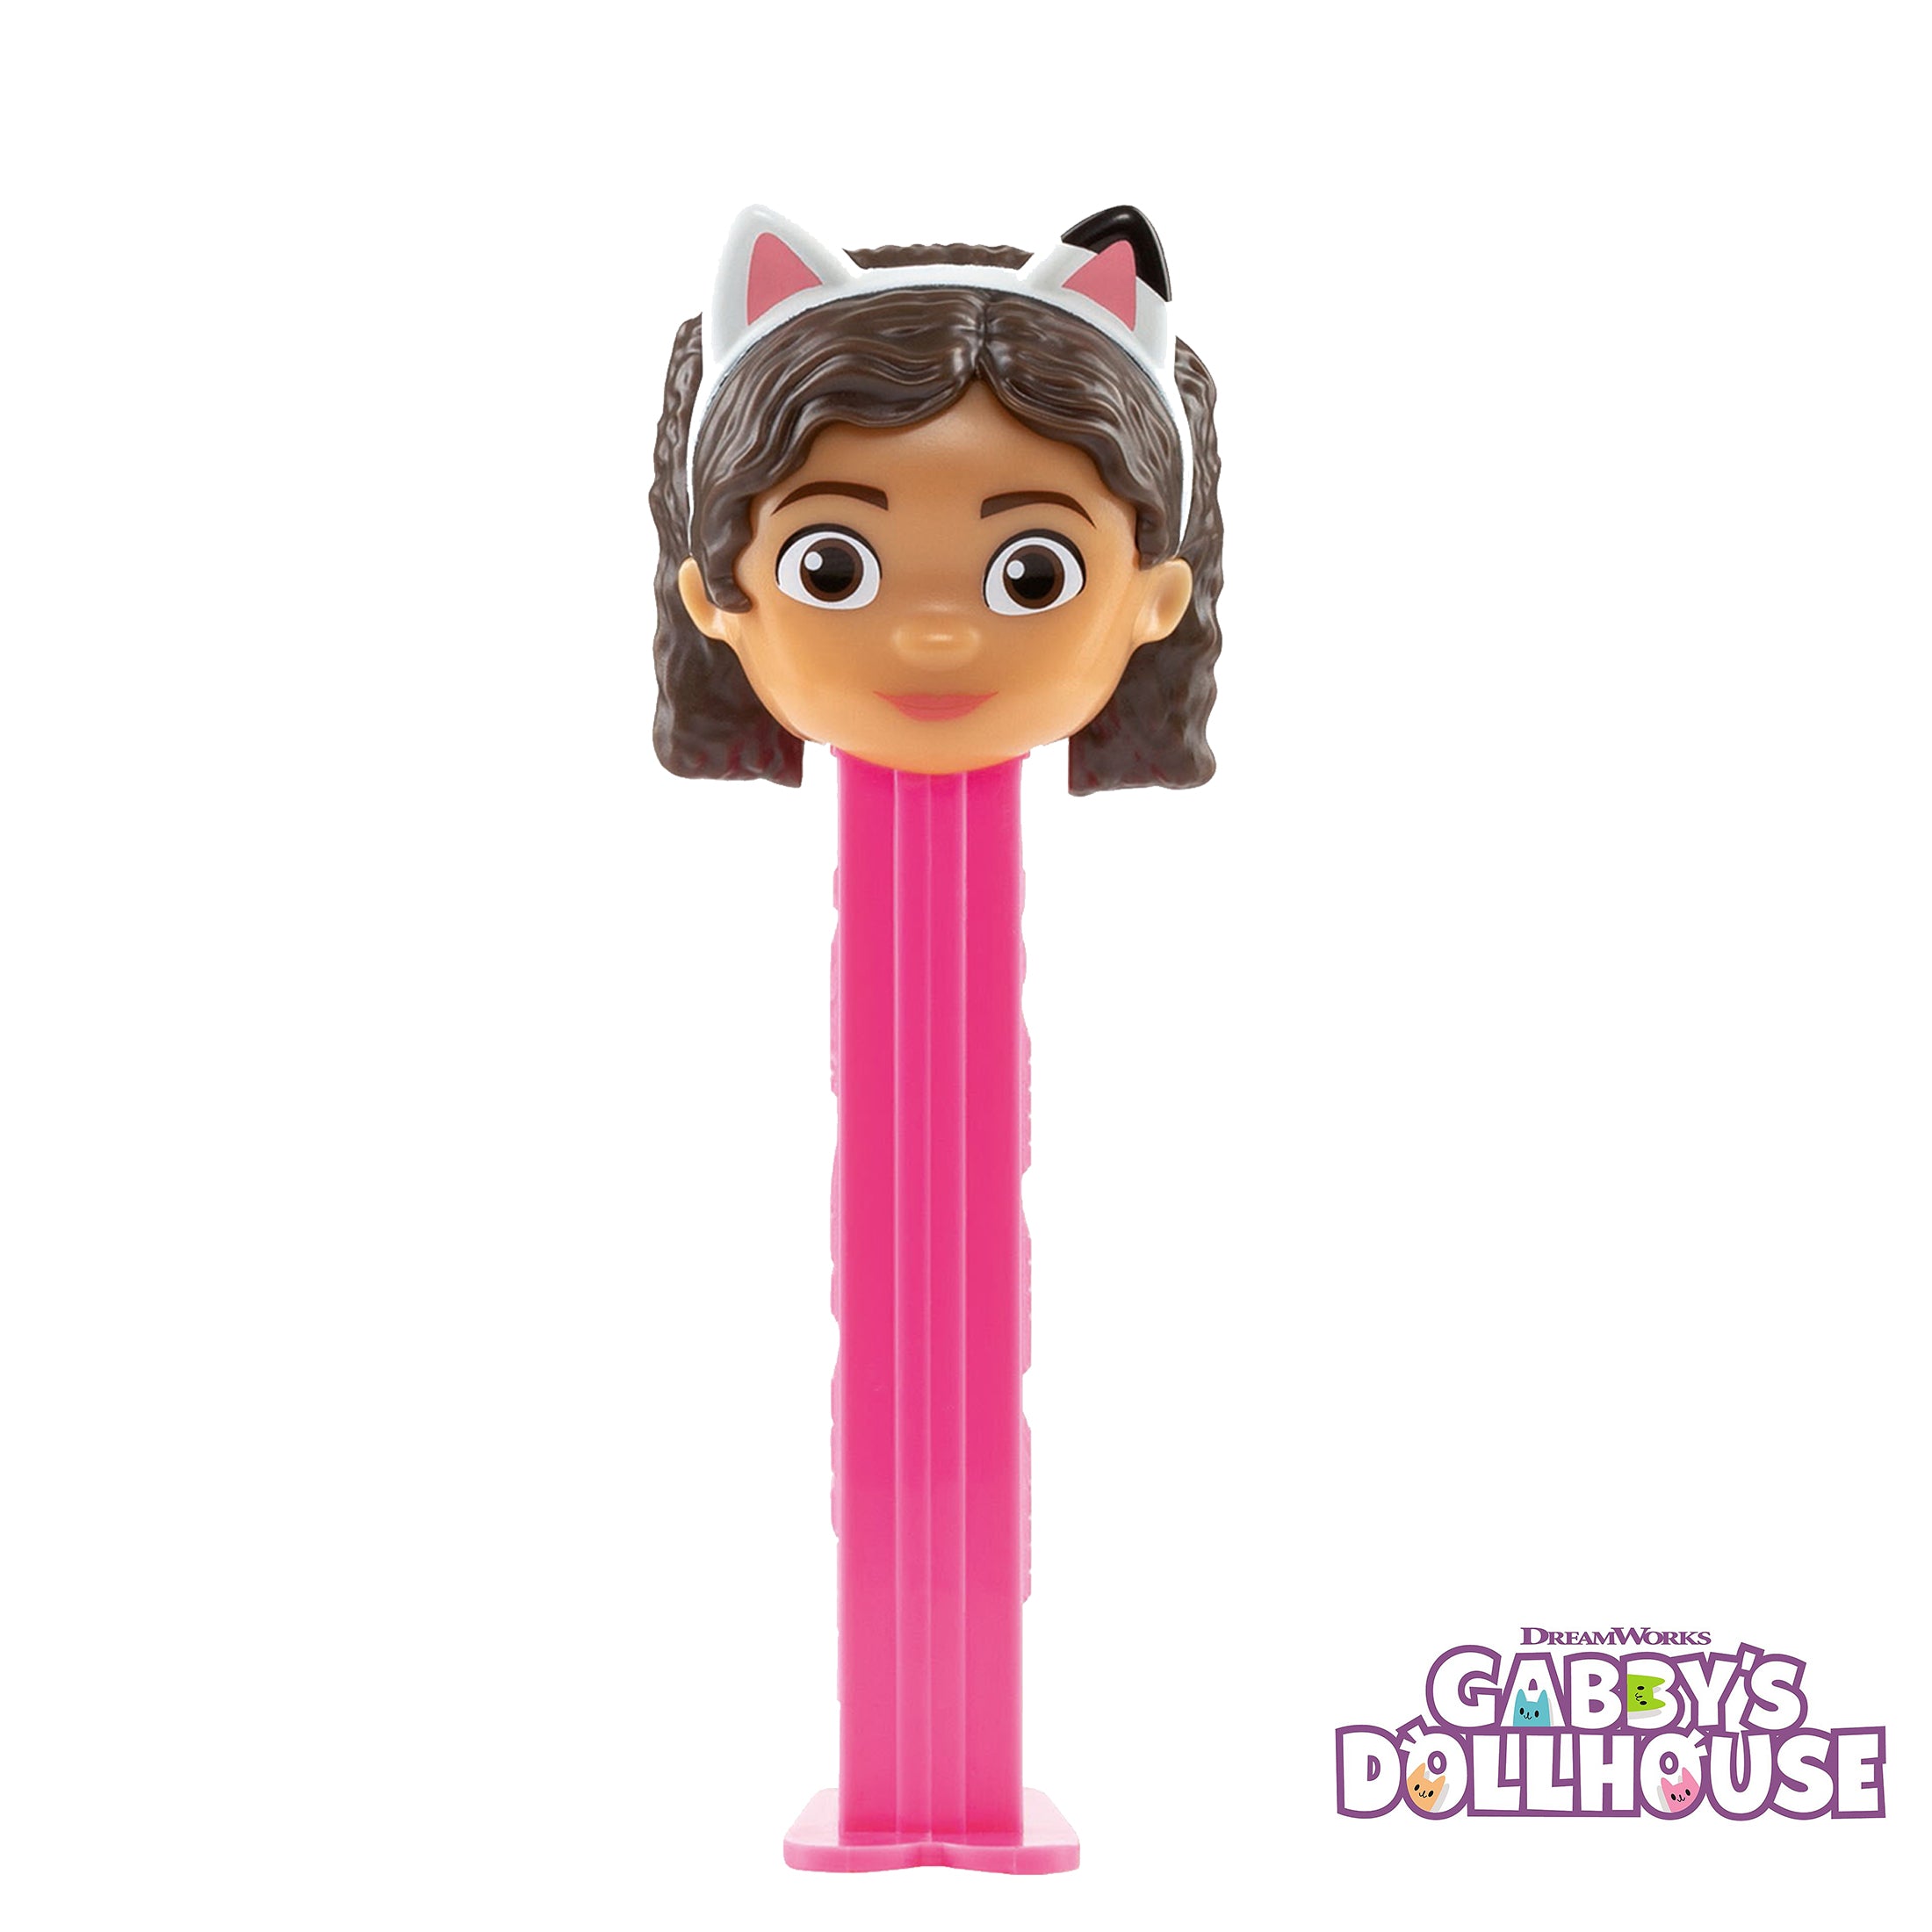 Pez Pirate Bobblehead  Collectibles And More In-Store